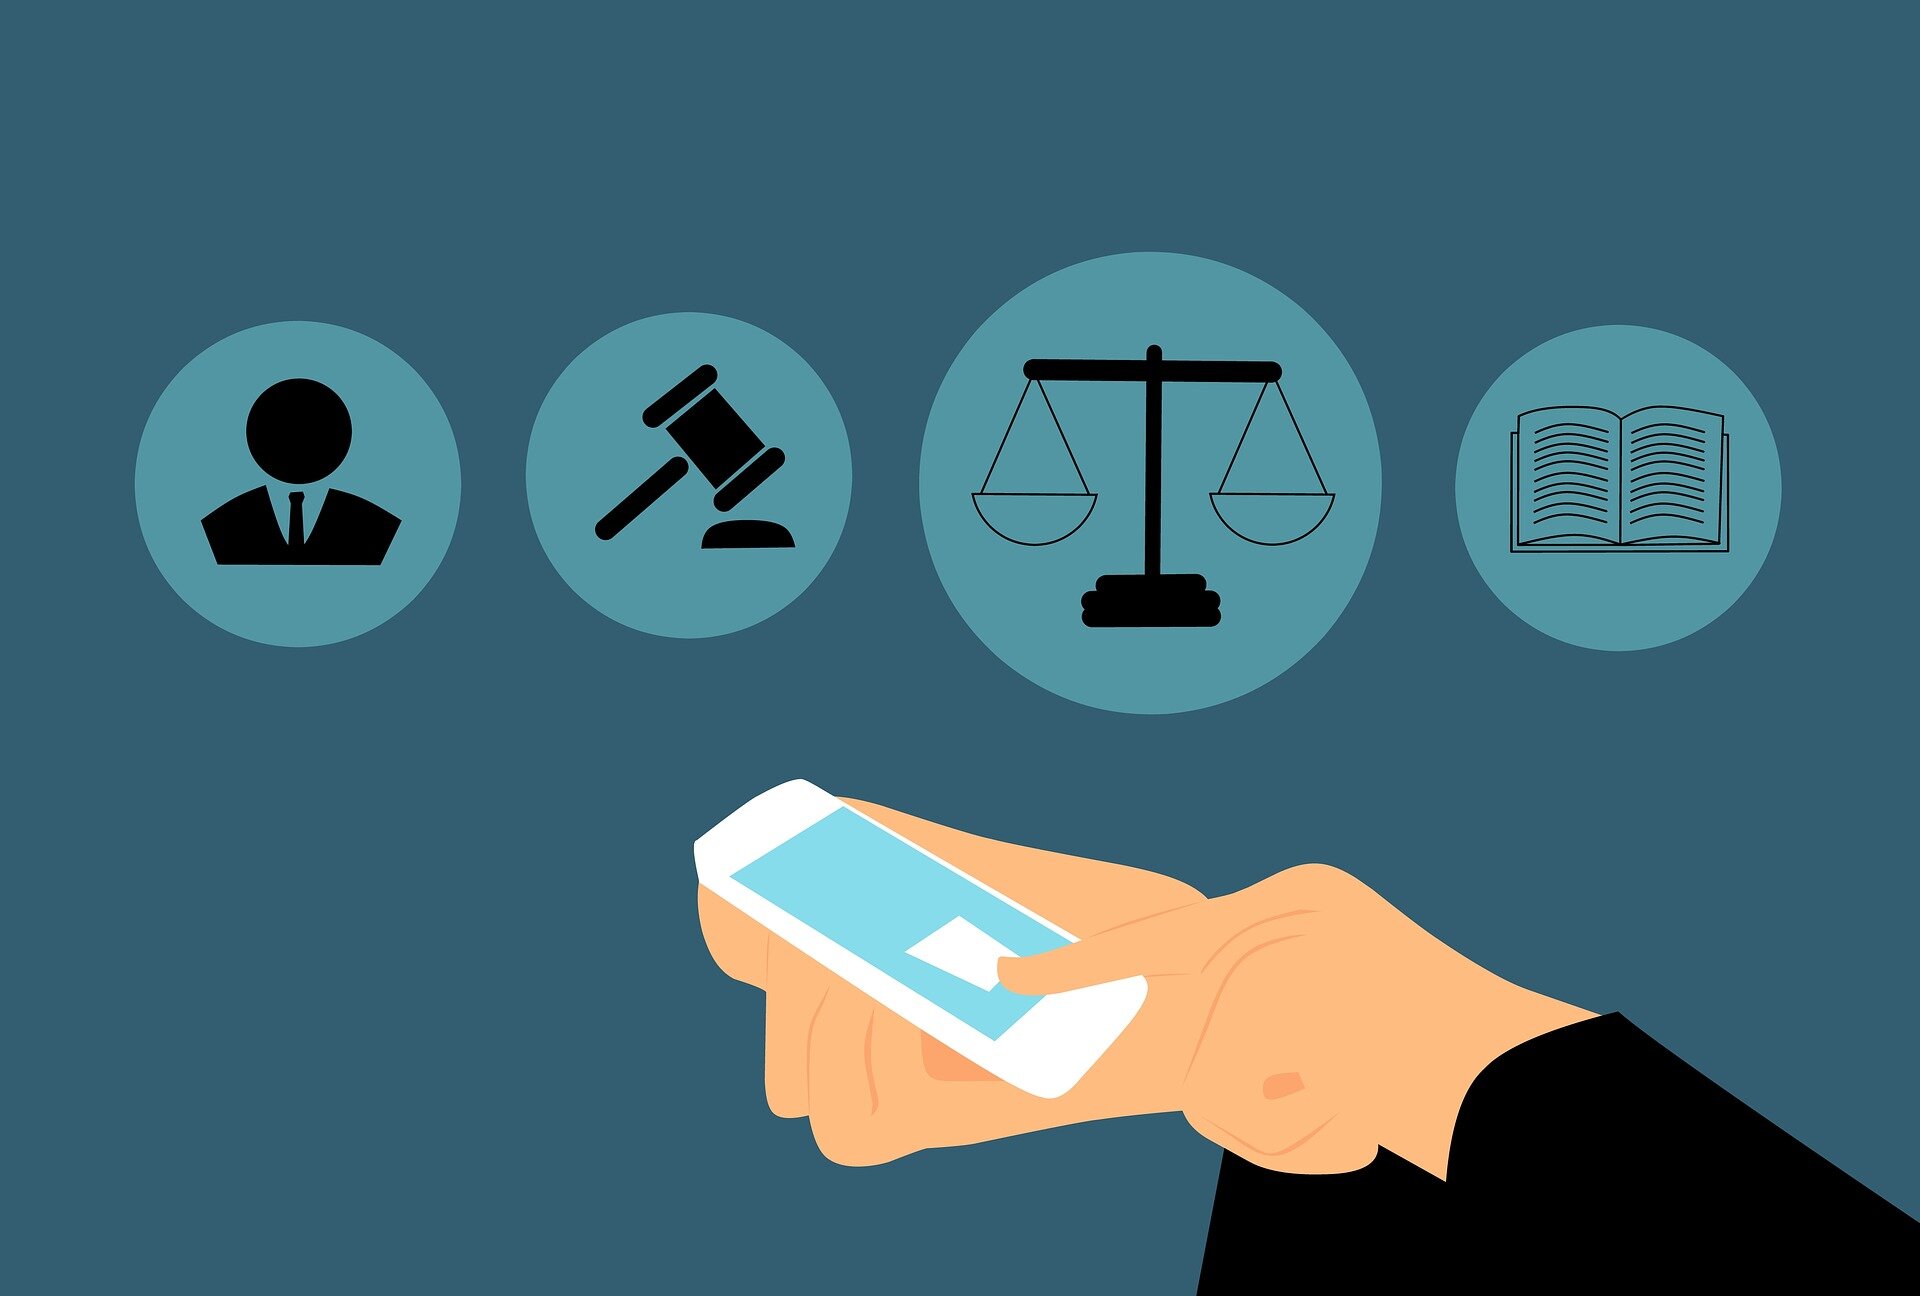 Legal professionals ‘sitting on the fence’ in terms of embracing new technologies, report finds